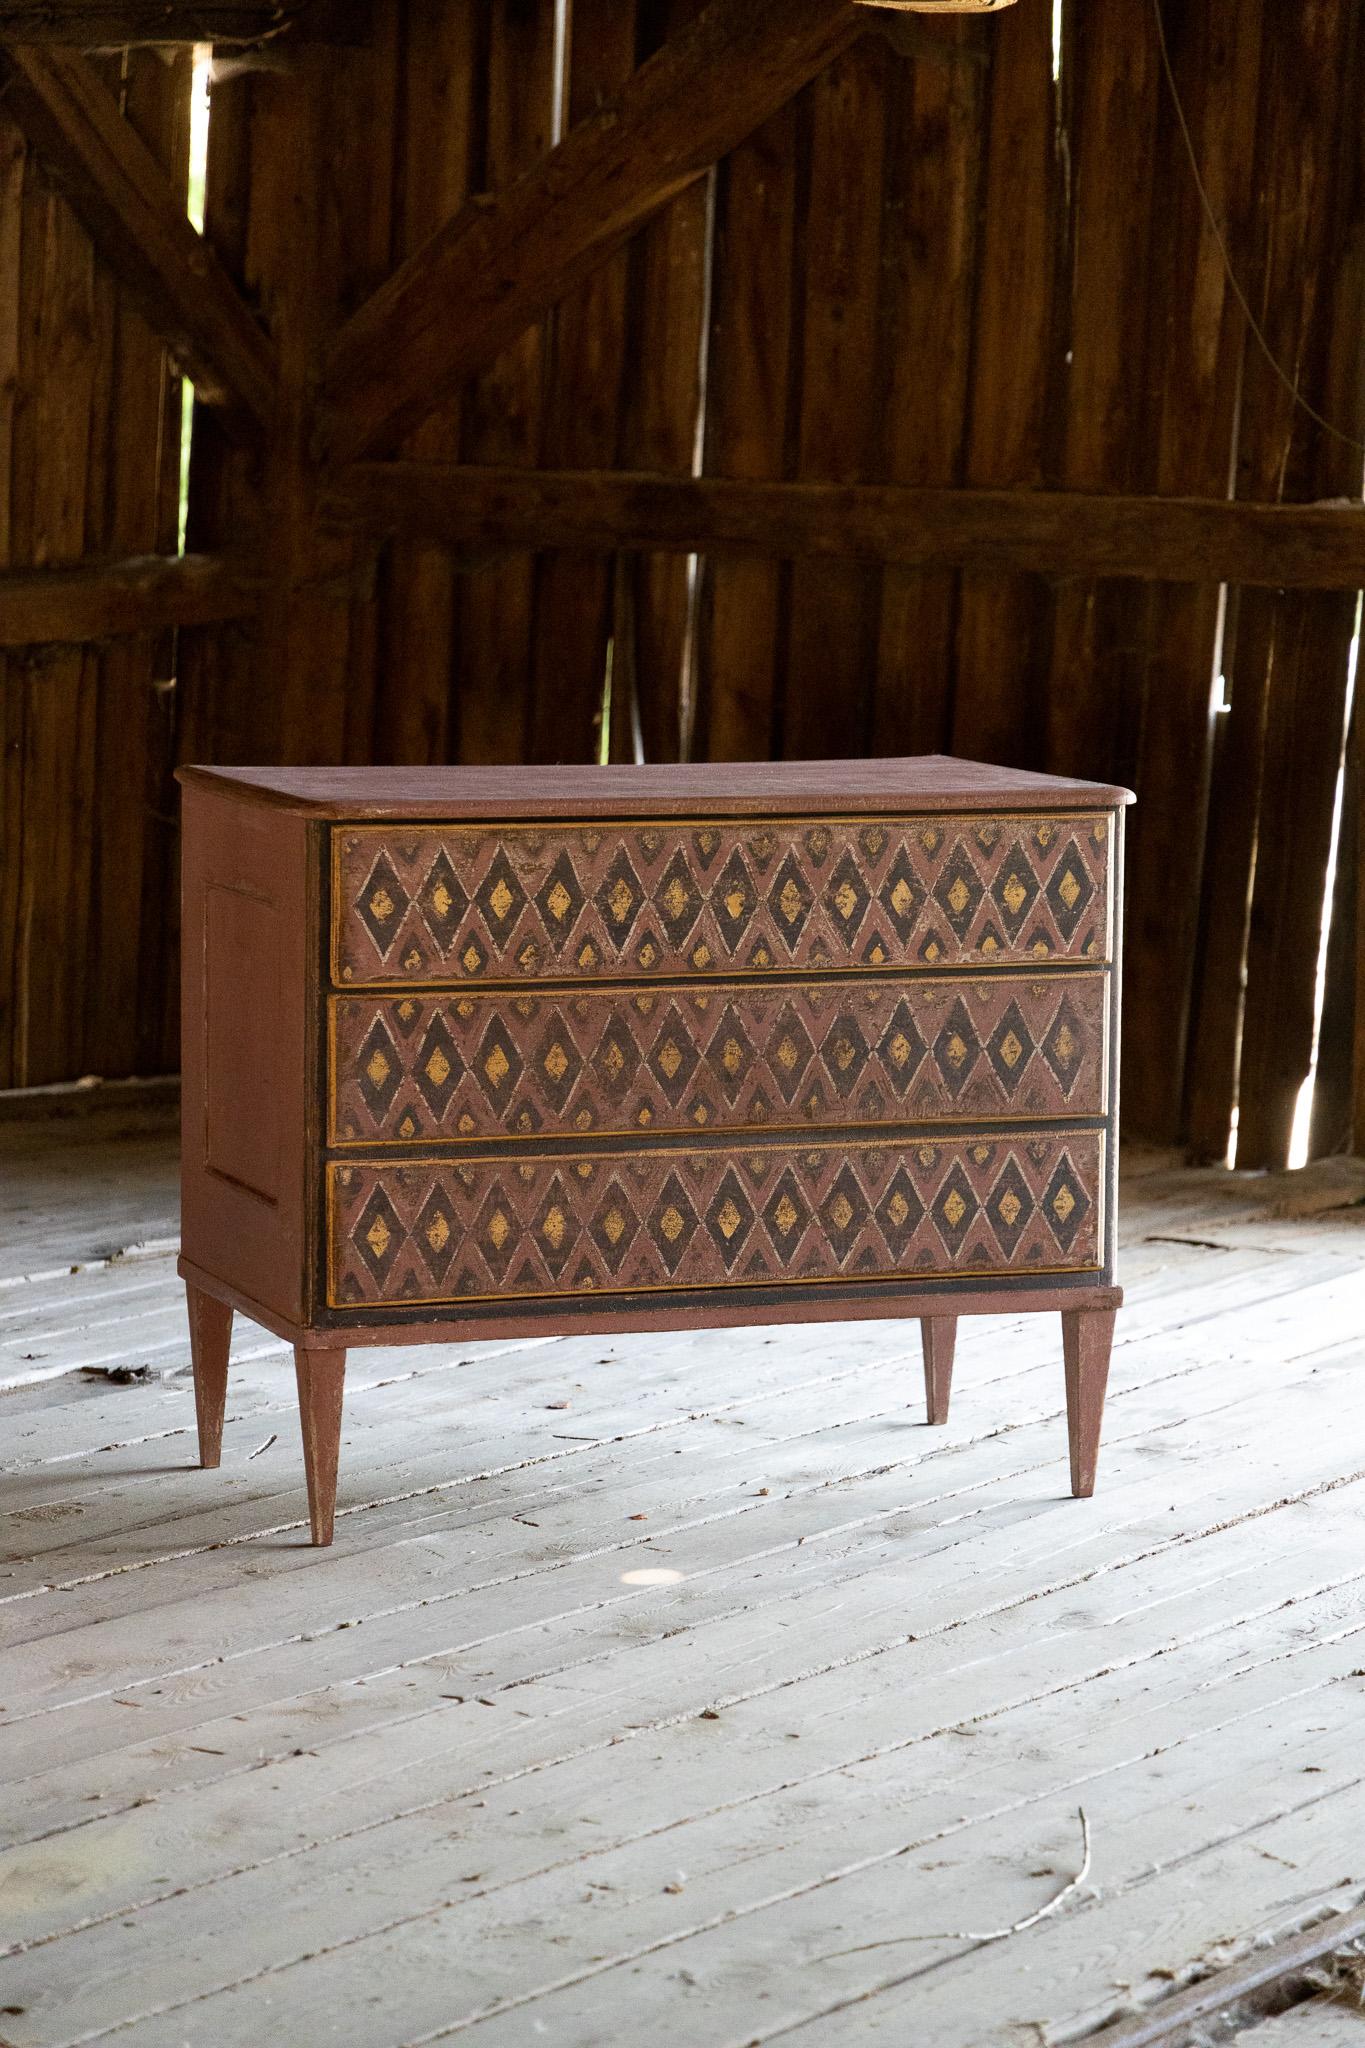 Brick-red chest of drawers with three drawers and coffered sides. The chest of drawers stands on square pointed feet and has been newly painted according to historical models. The front of the chest of drawers is embellished with a decorative